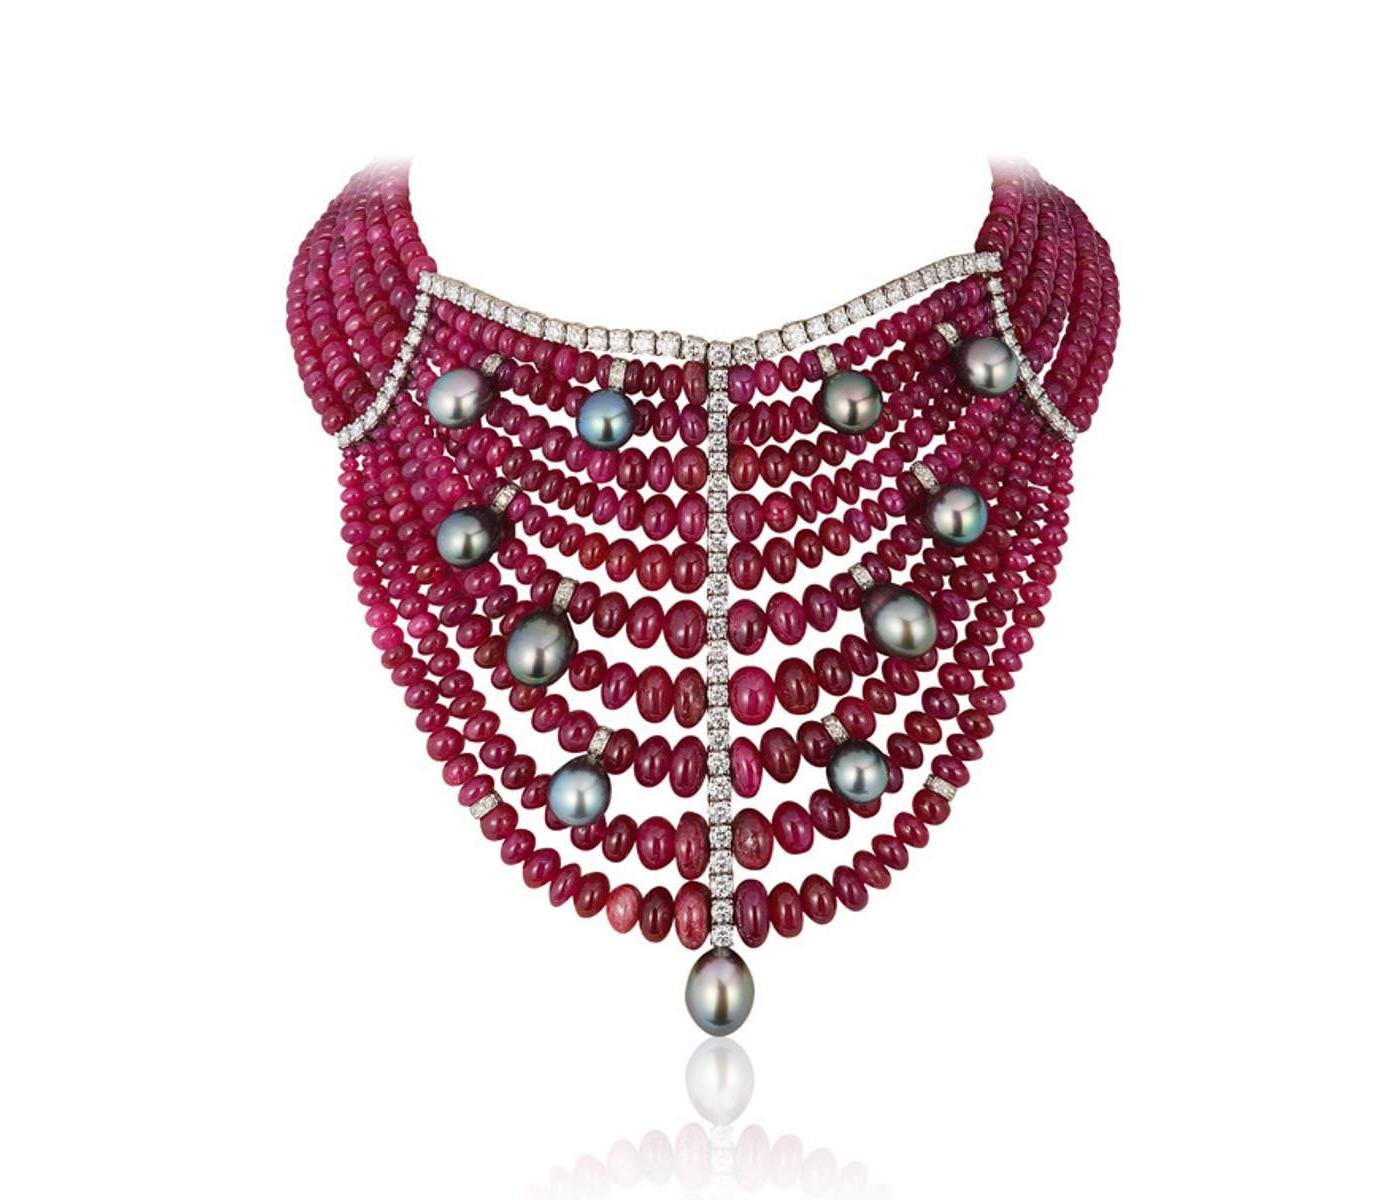 Necklace by Andreoli